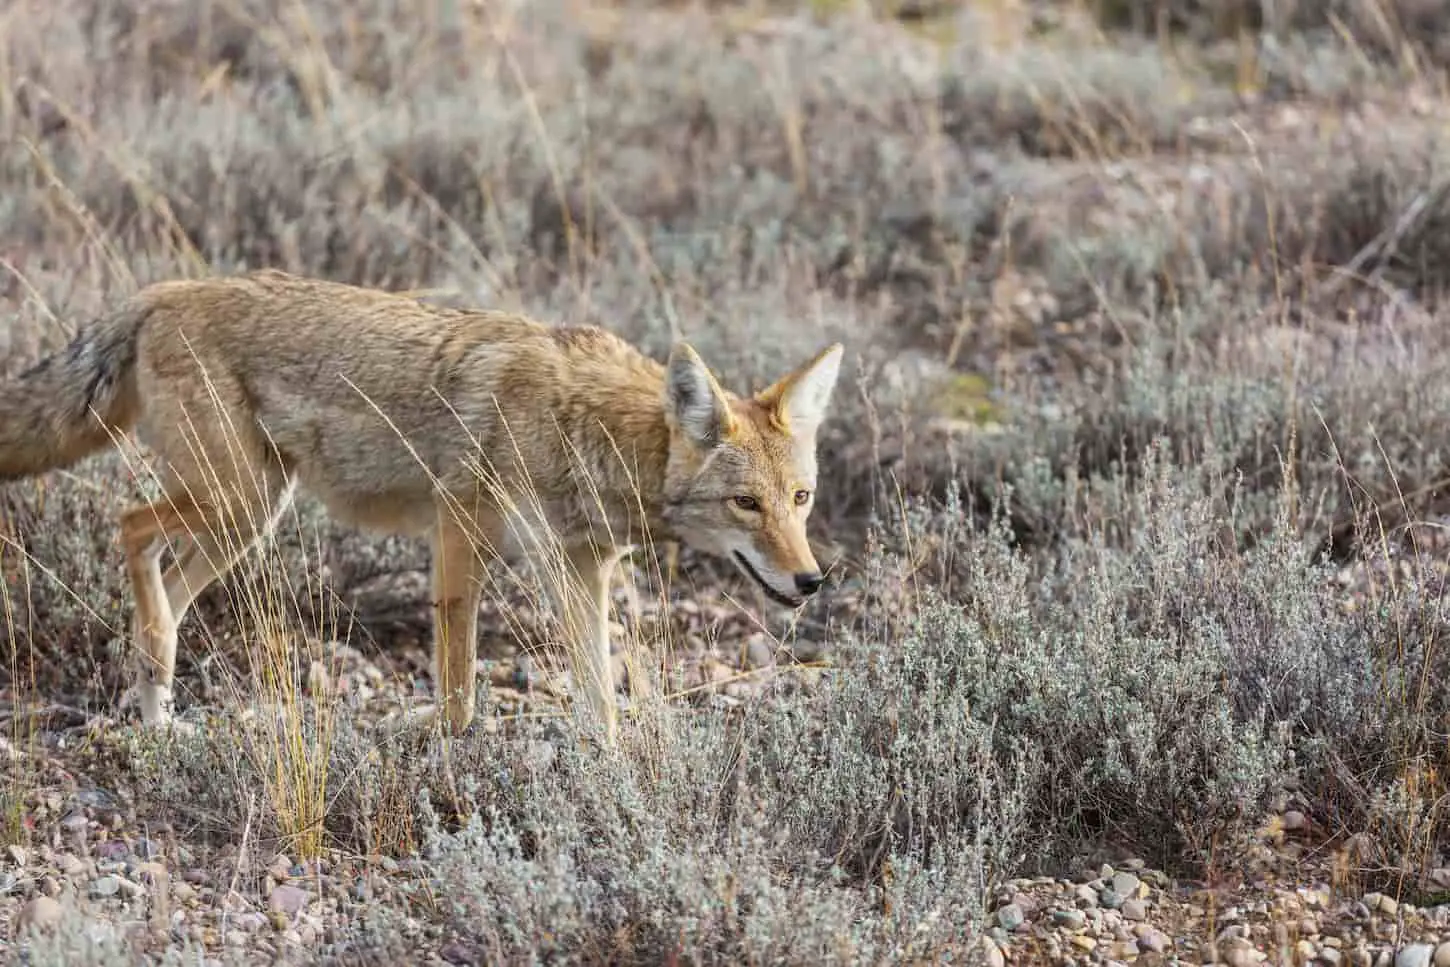 An image of a wild coyote in the pasture.